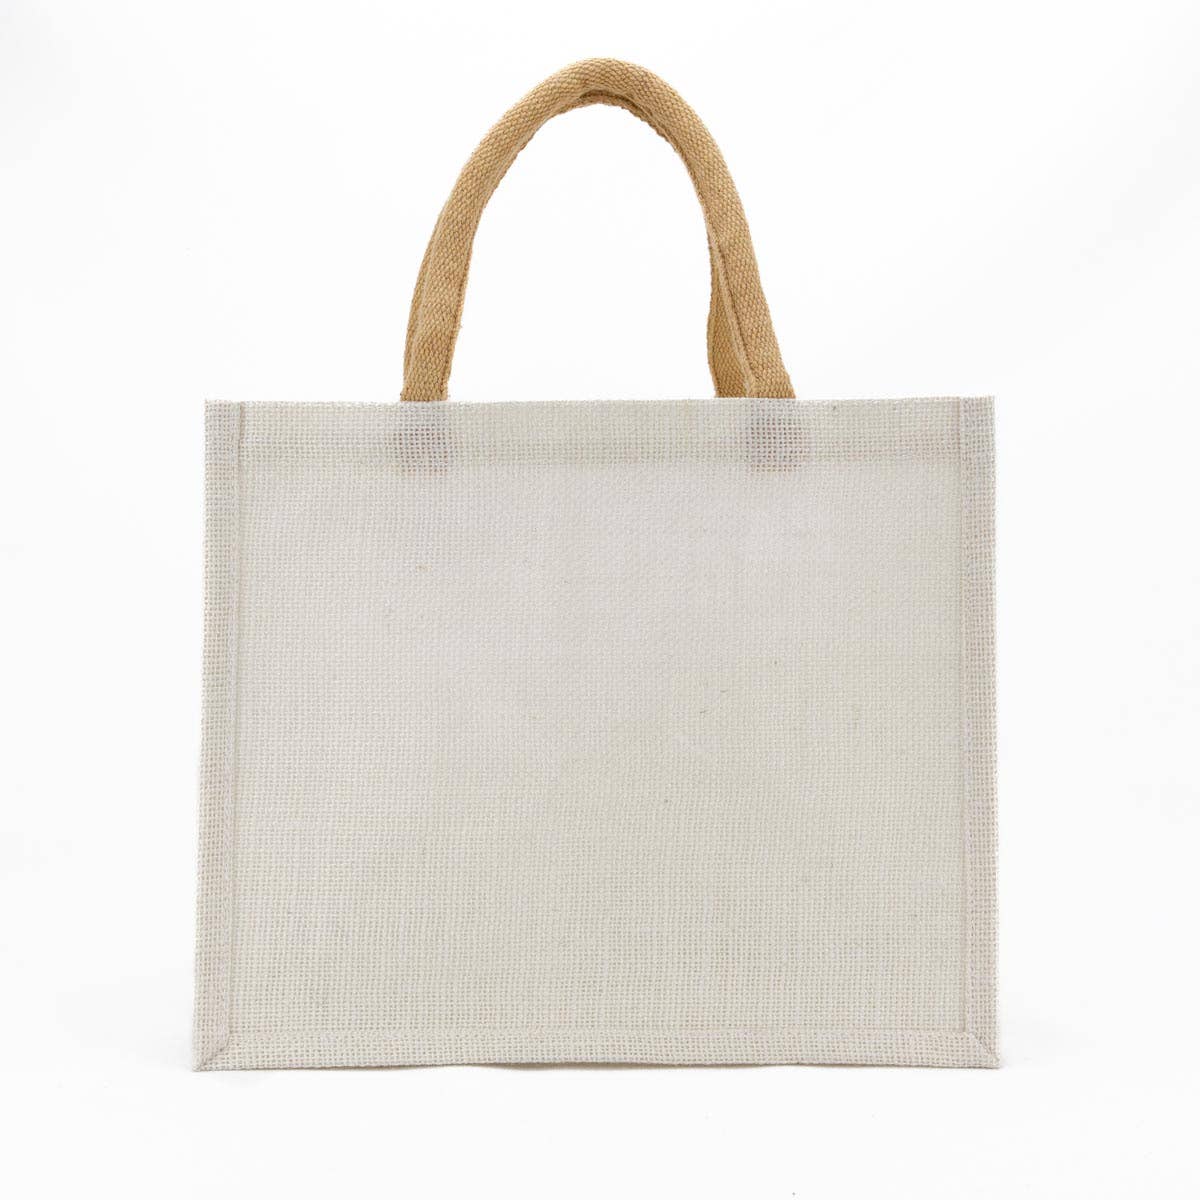 Jute Gift Tote, Medium, White by The Royal Standard